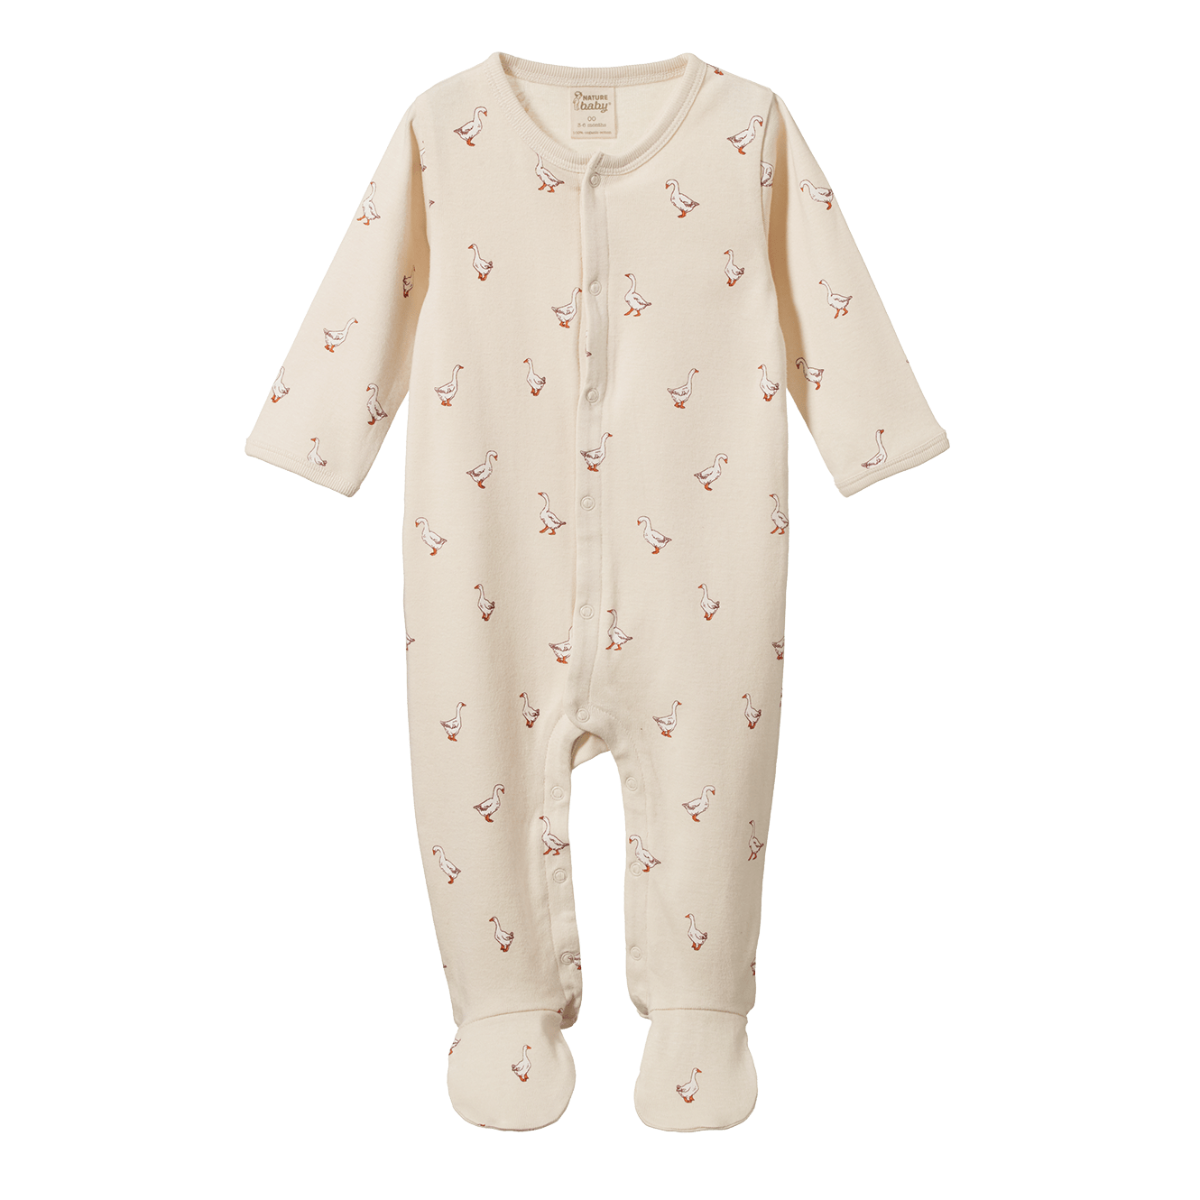 cotton stretch + grow | goosey print | nature baby